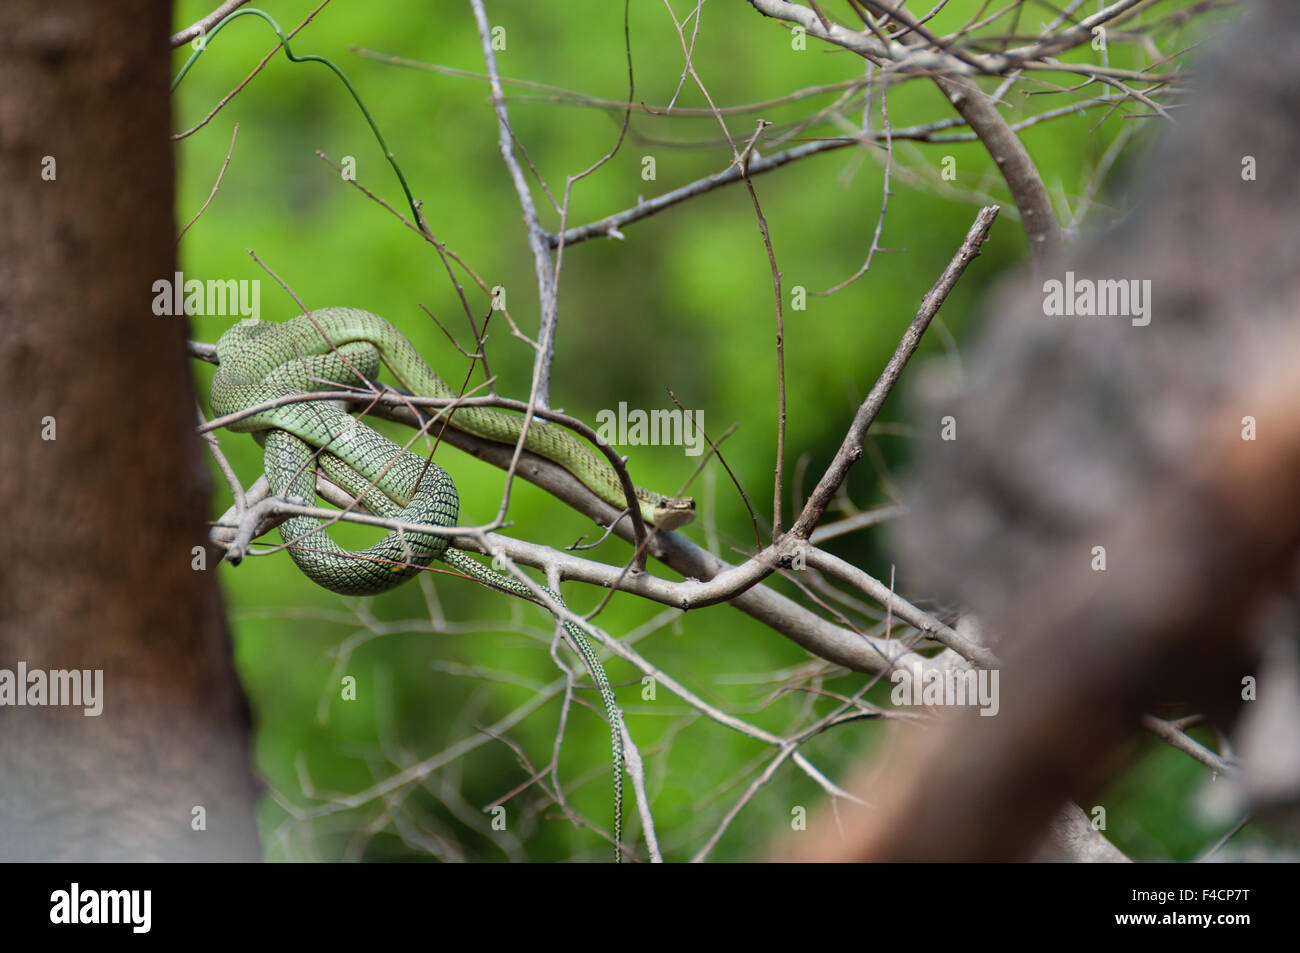 Poisonous Green snake sitting on a branch Stock Photo